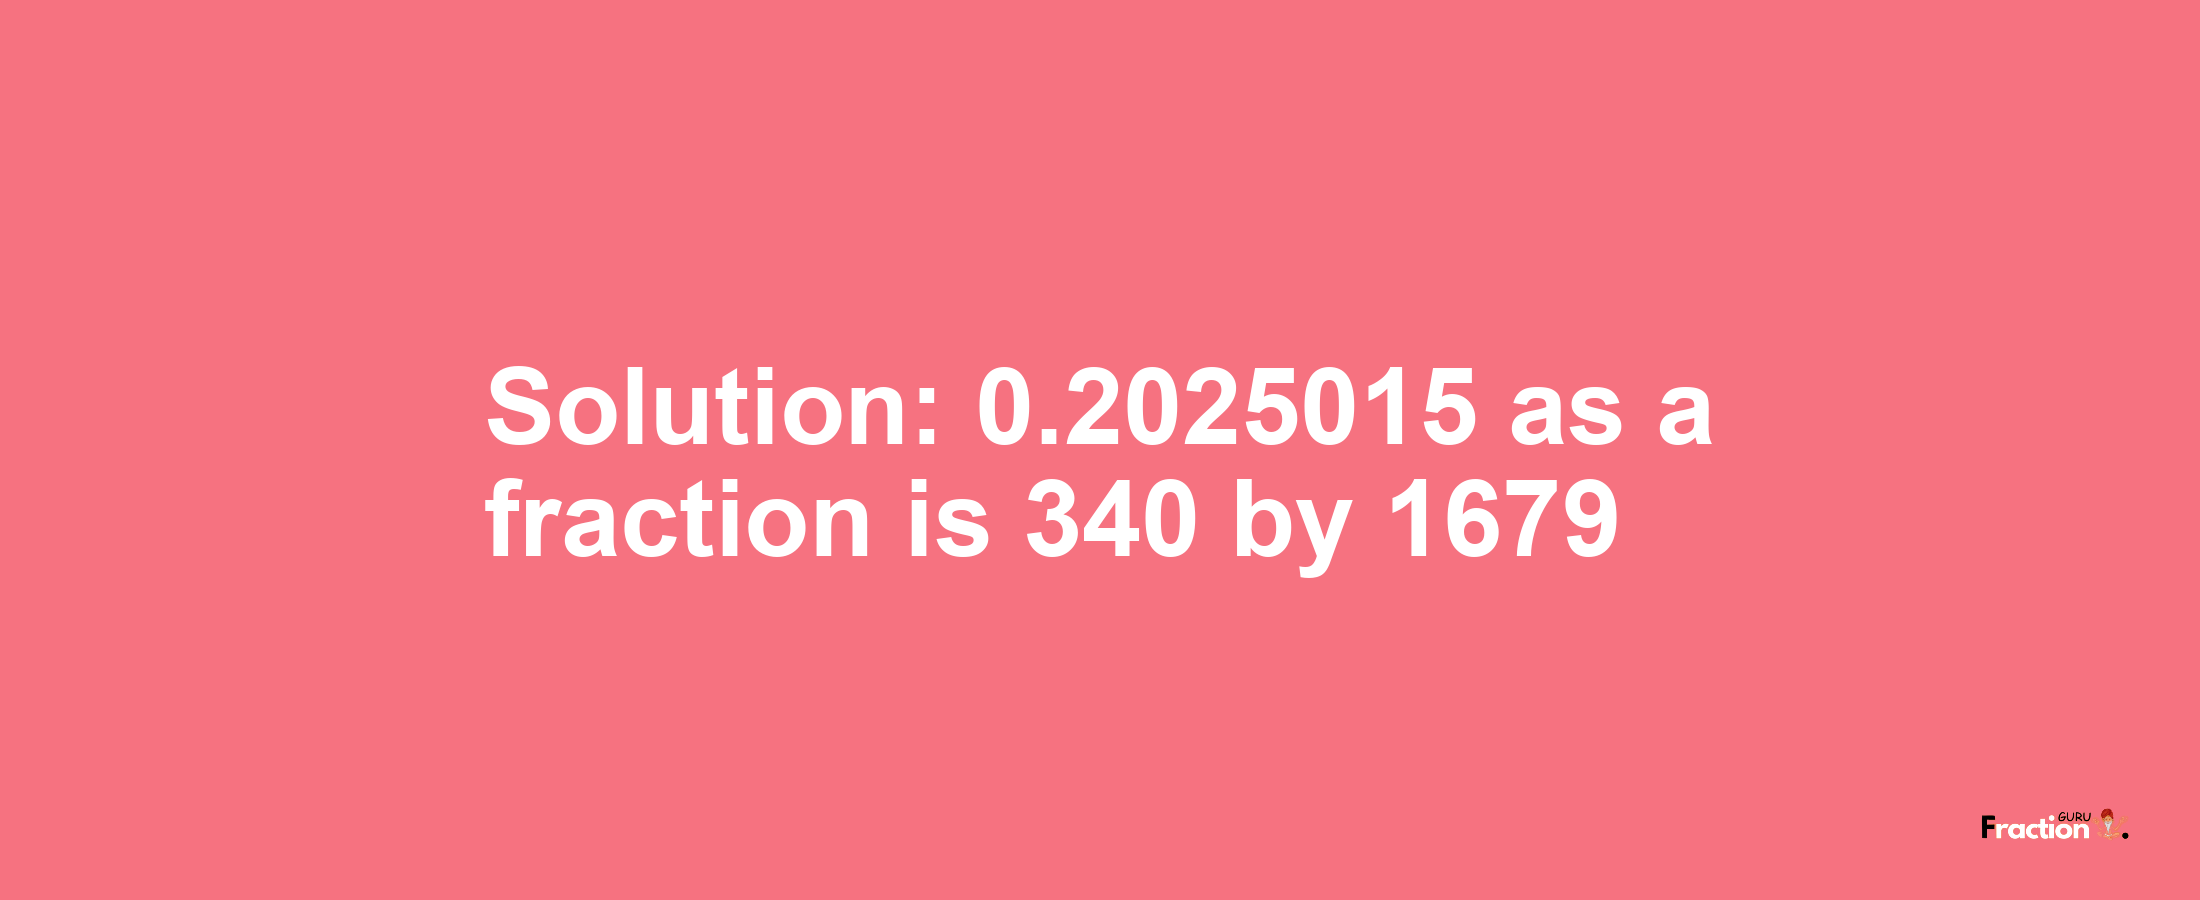 Solution:0.2025015 as a fraction is 340/1679